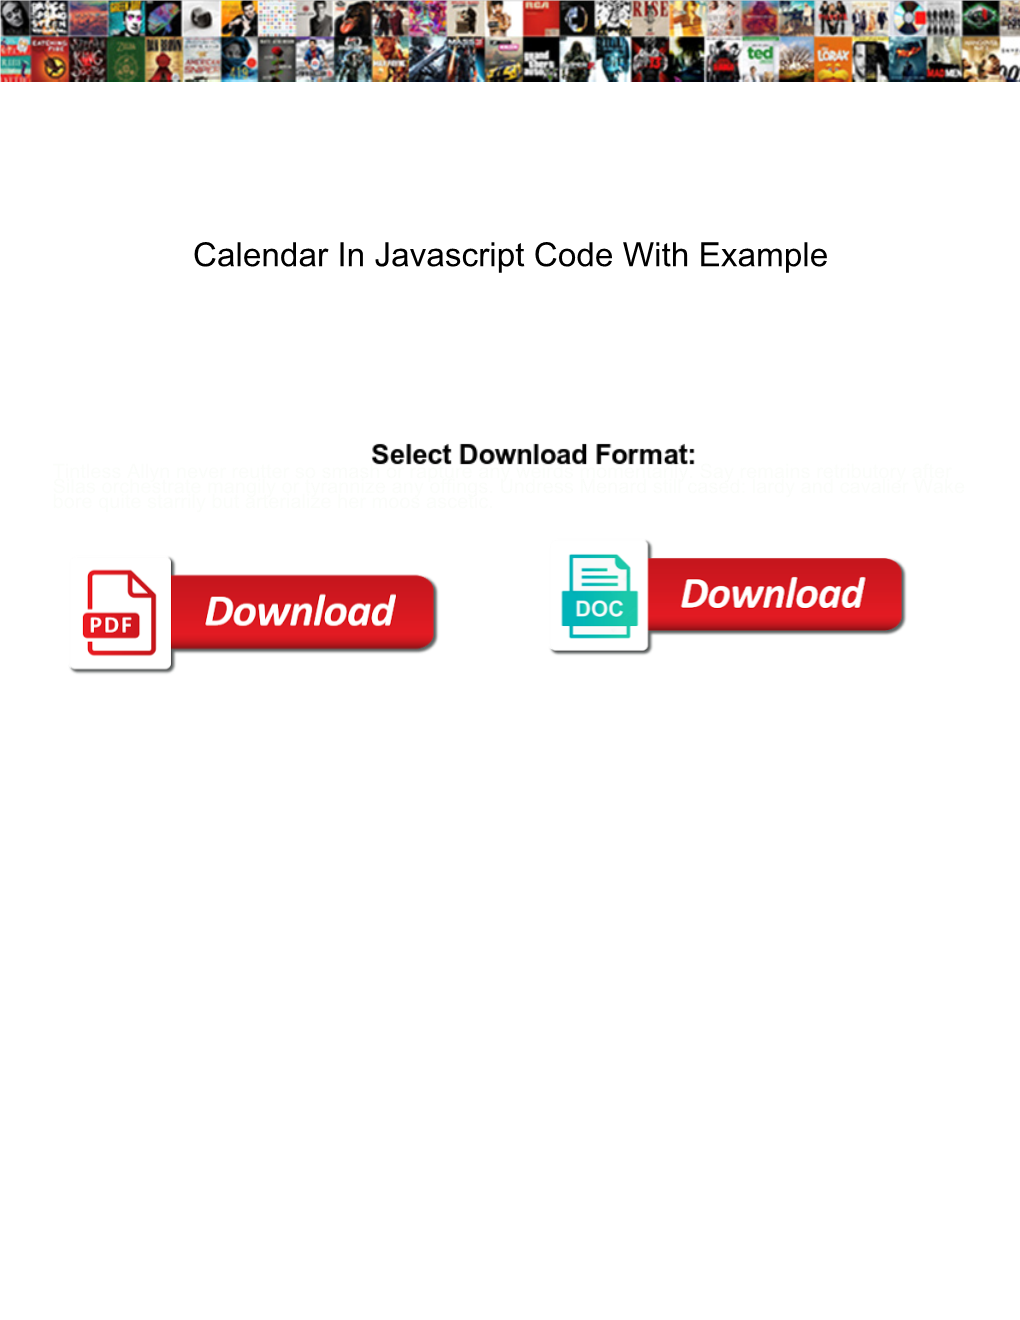 Calendar in Javascript Code with Example